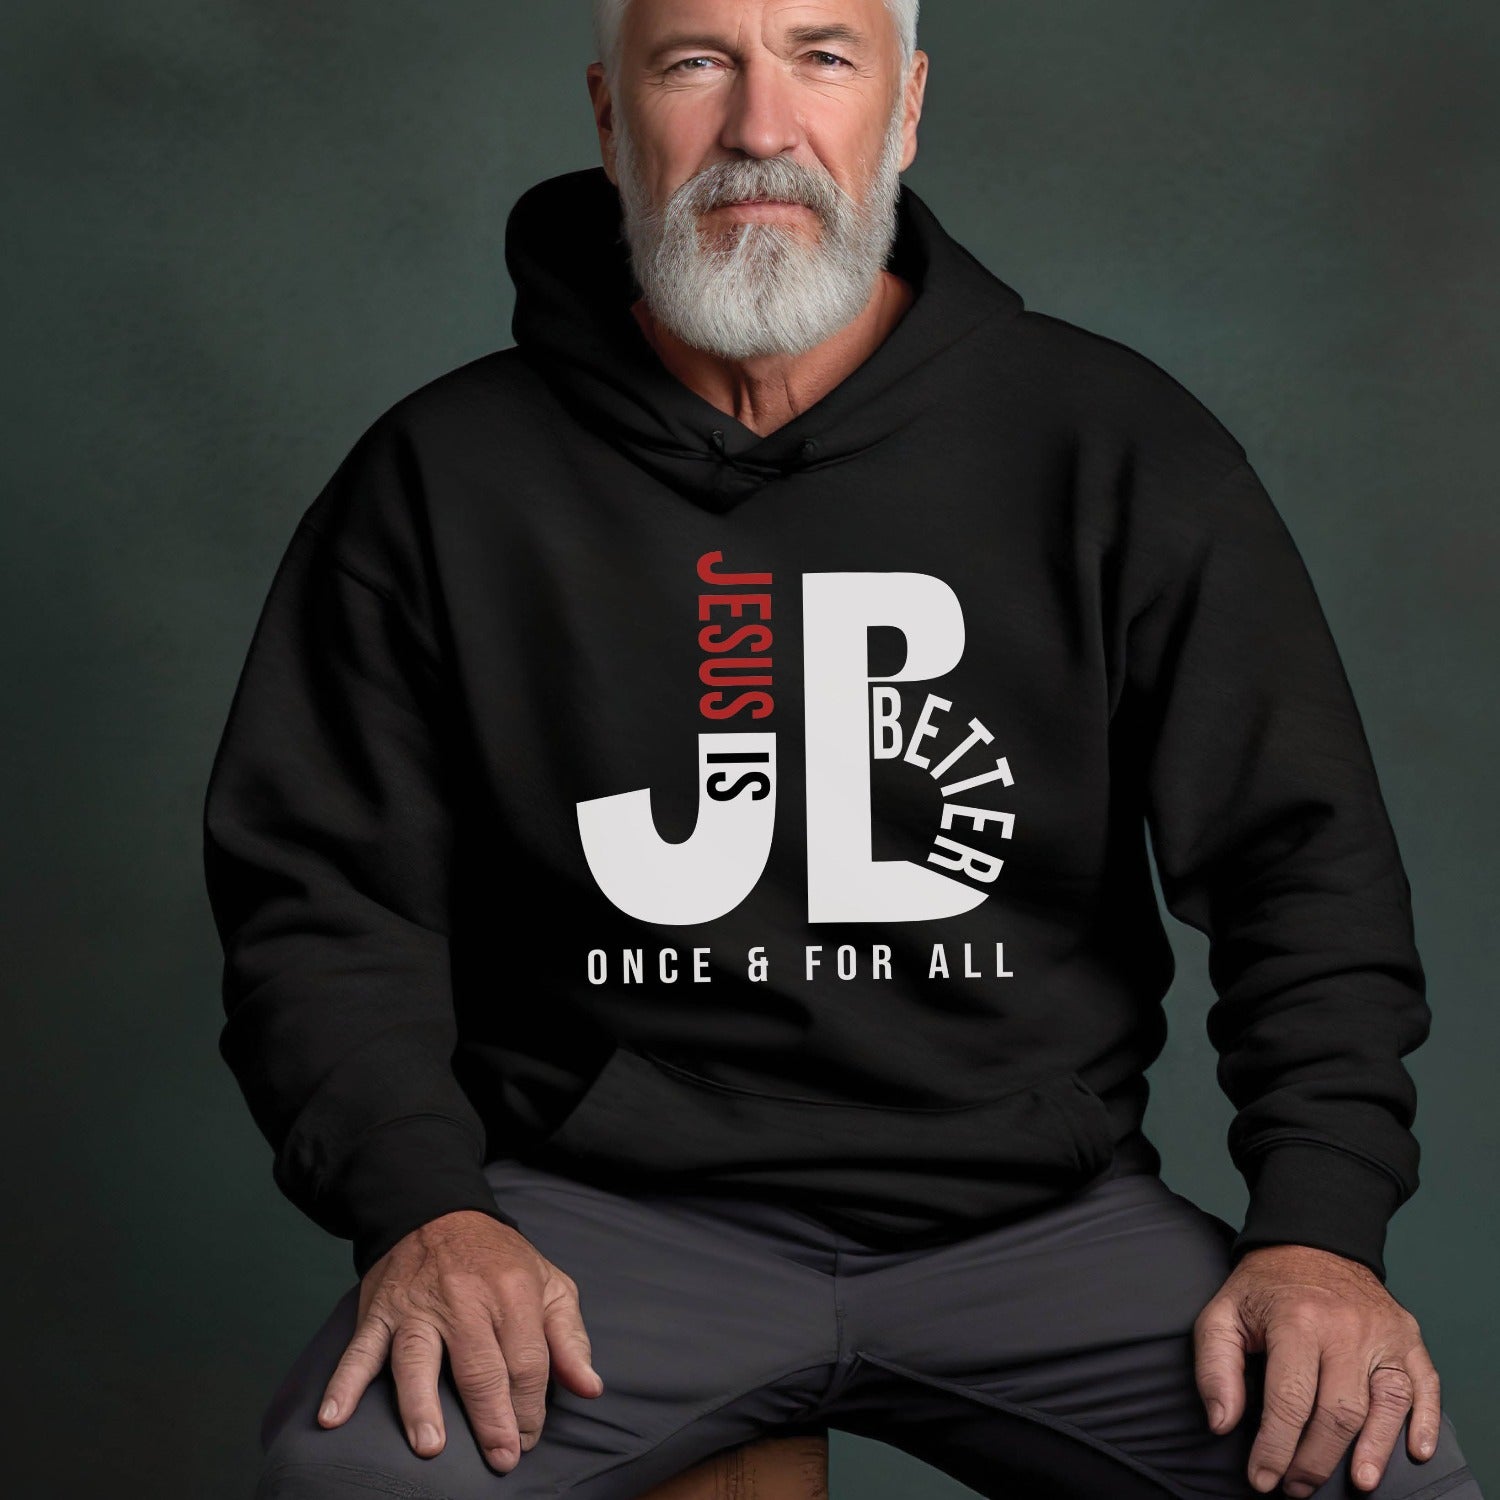 Man like a dad or grandpa wearing a cozy "JB" typography "Jesus is Better Once and For All" design in white and red letters, based on the Christian bible book of Hebrews, printed on a black color unisex hoodie, created for faith-based men and women, great father's day gift for Dad